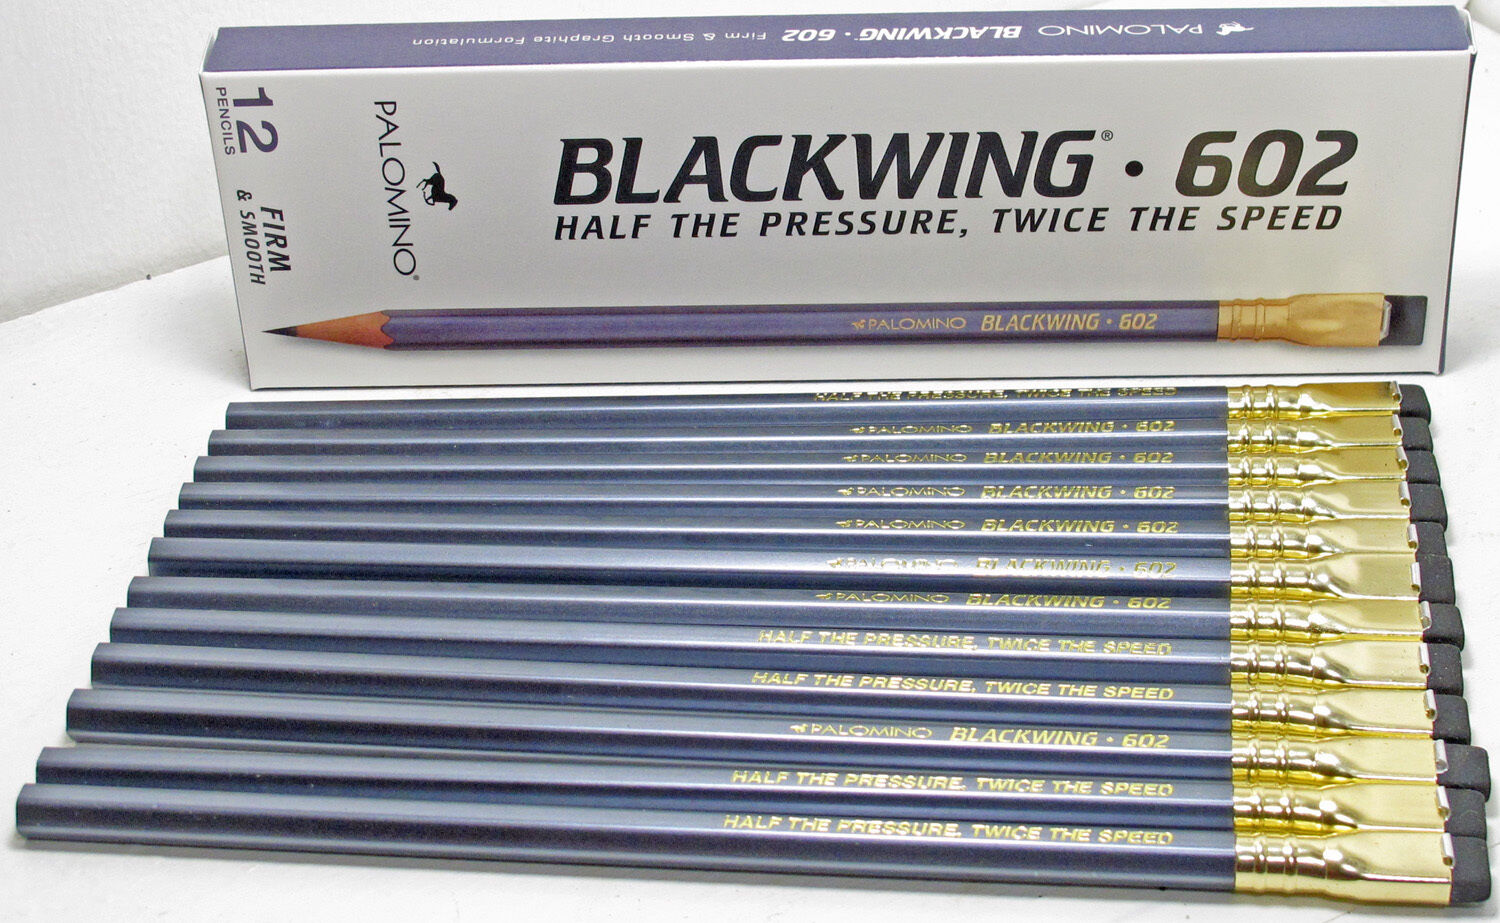 NEW Blackwing 602 Pencil 12 Pack (Dozen) Firm and Smooth - Top Quality Choice